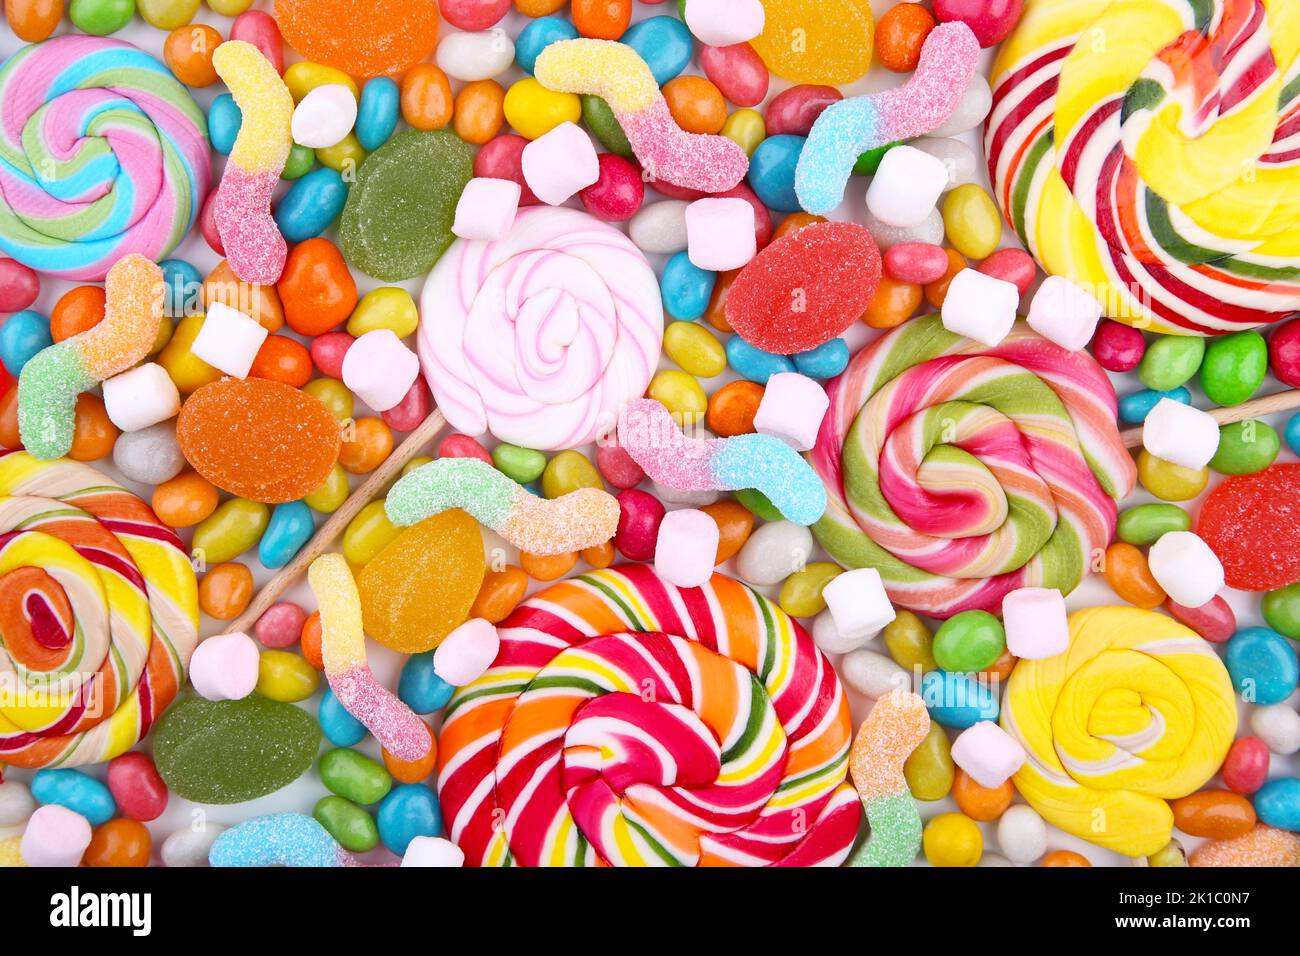 Assorted mix of various candies and jellies. Colorful sweets Stock Photo